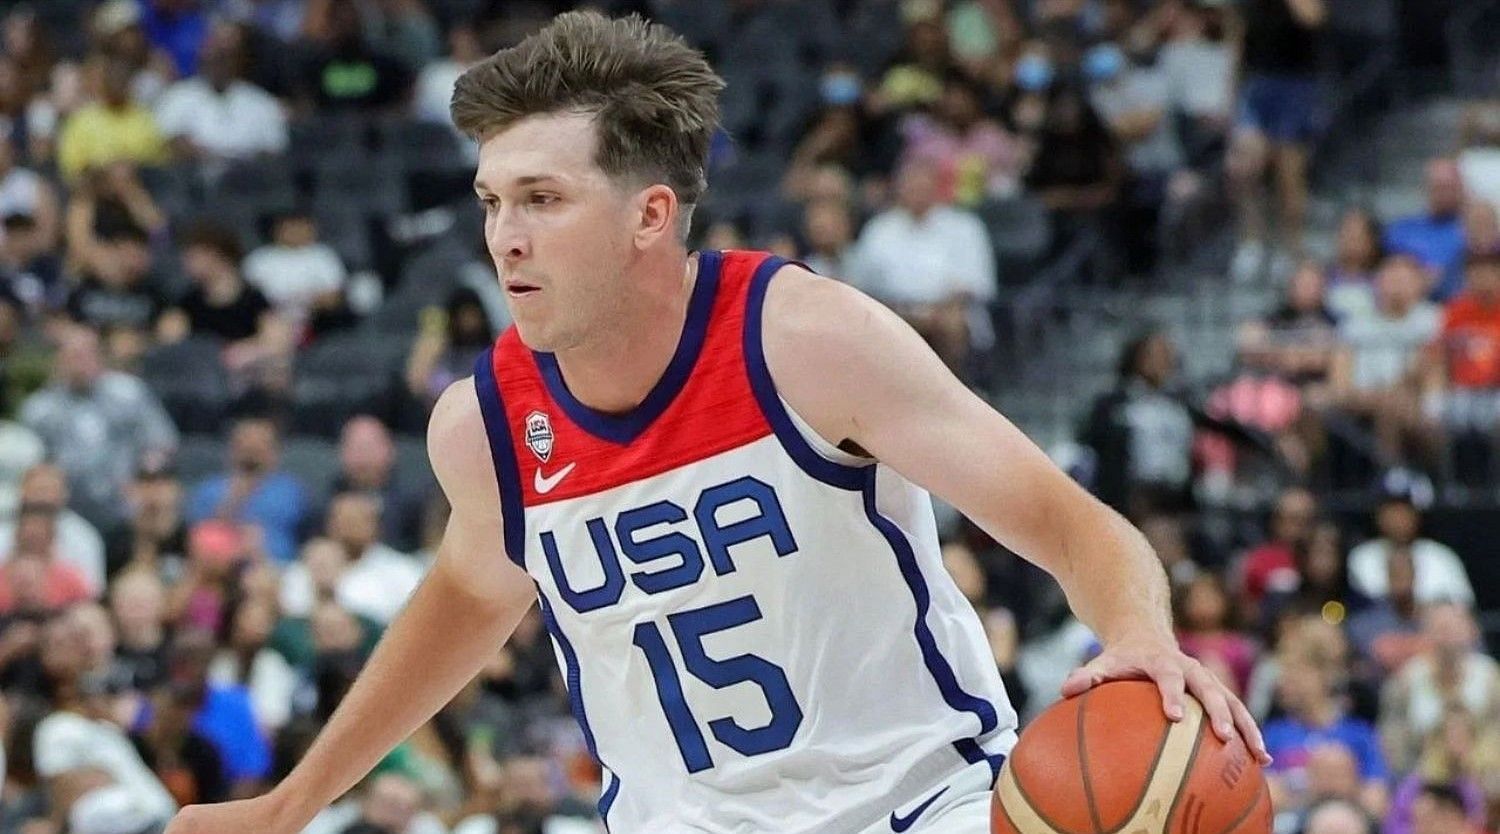 Austin Reaves was part of Team USA at the 2023 FIBA World Cup.